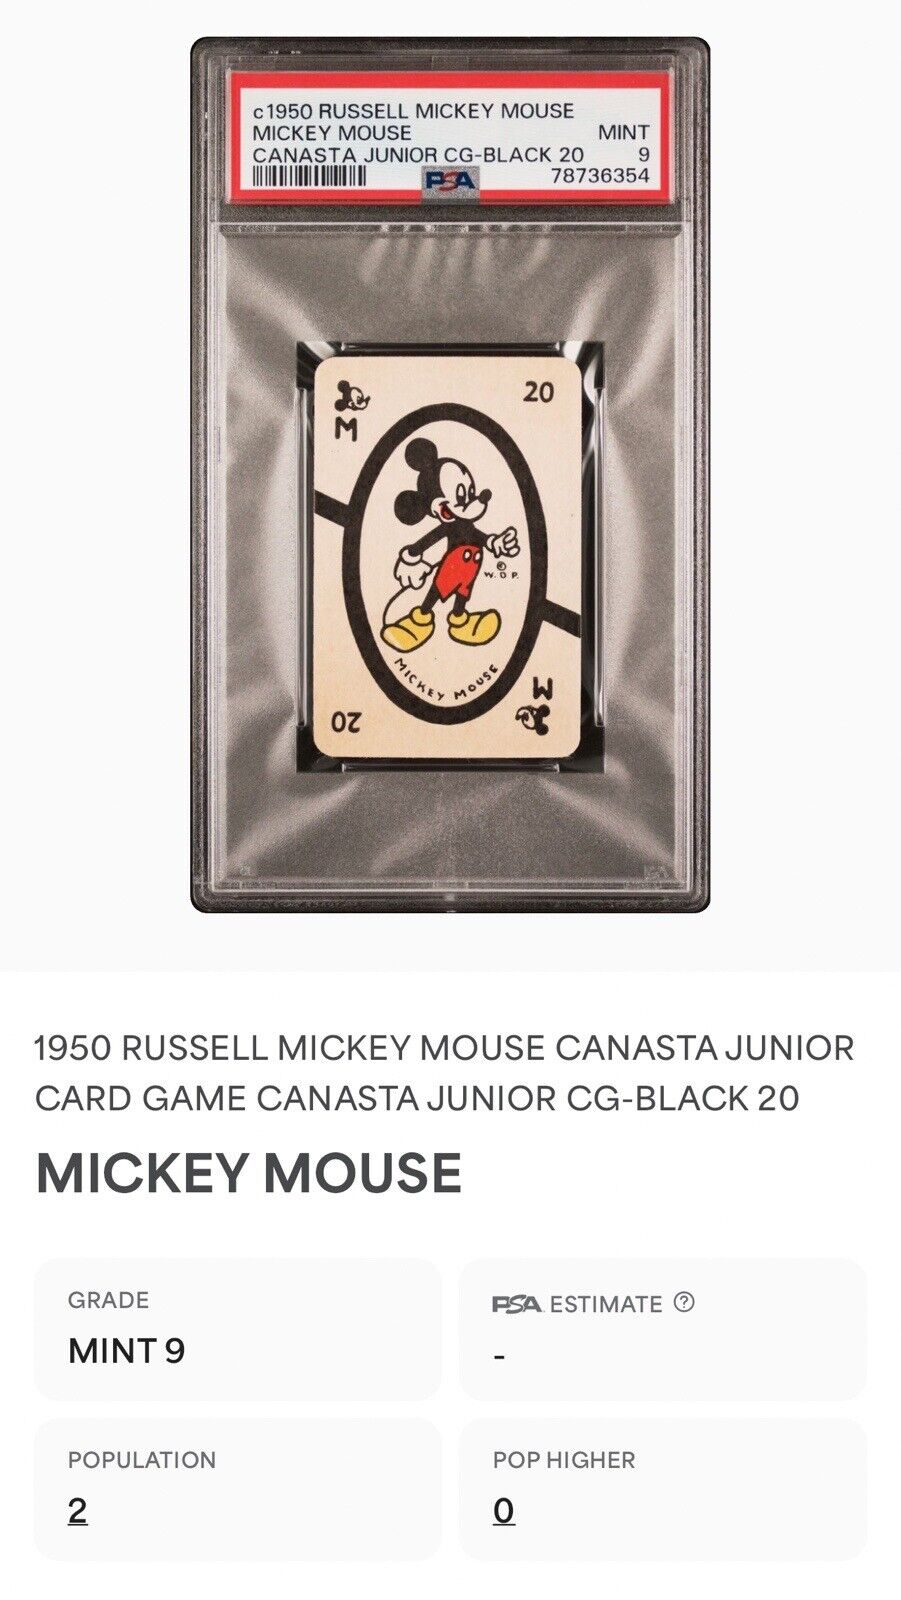 EXTREMELY RARE VINTAGE 1950s RUSSELL MICKEY MOUSE CANASTA CARD PSA 9 MINT